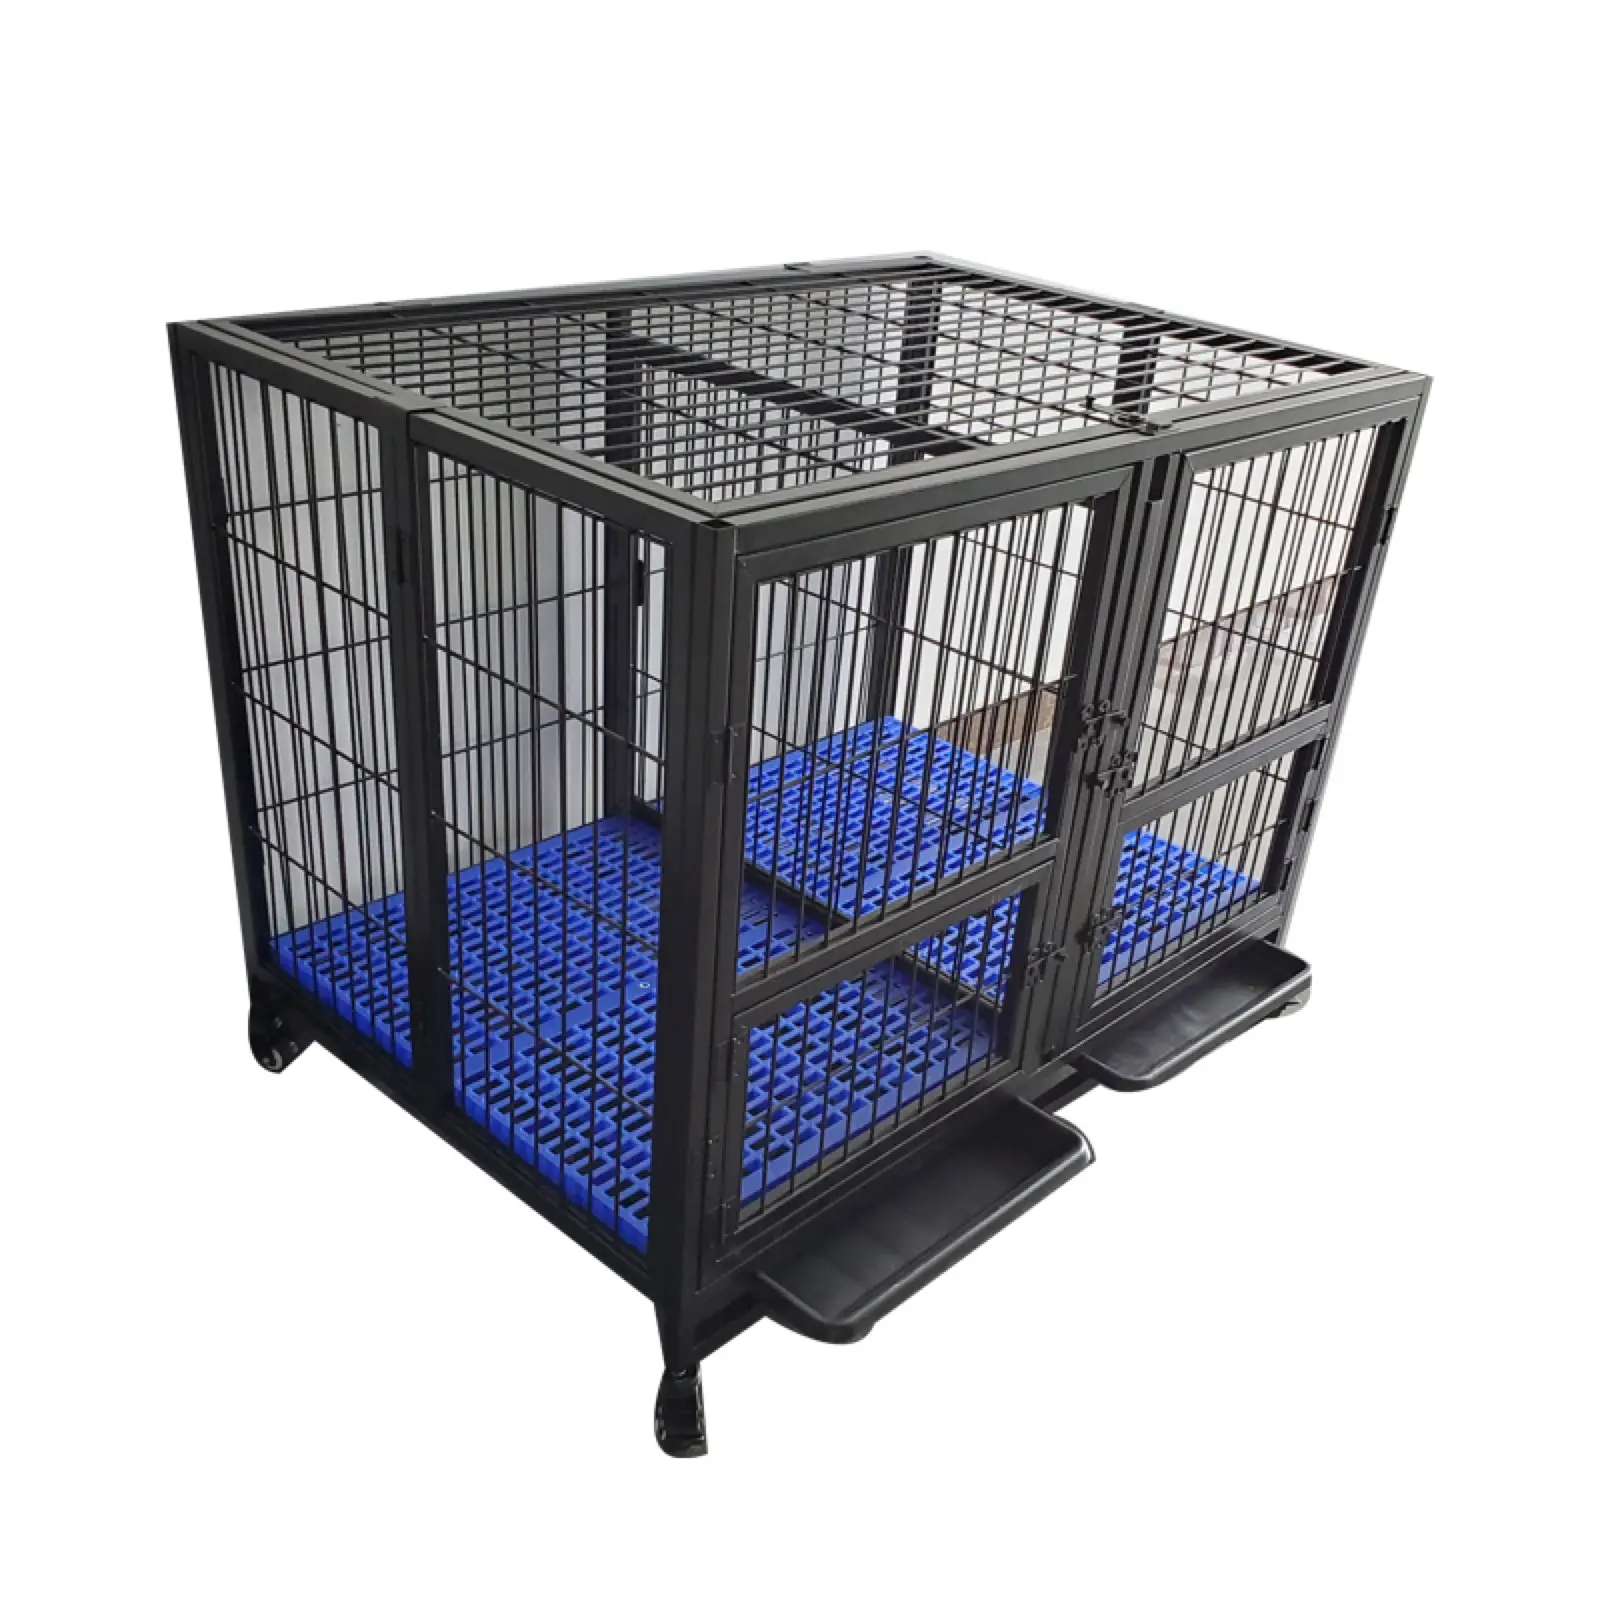 Manufacturer jaula big indoor outdoor pet kennel dog cage with tray large foldable Iron tough pet Cage with wheel